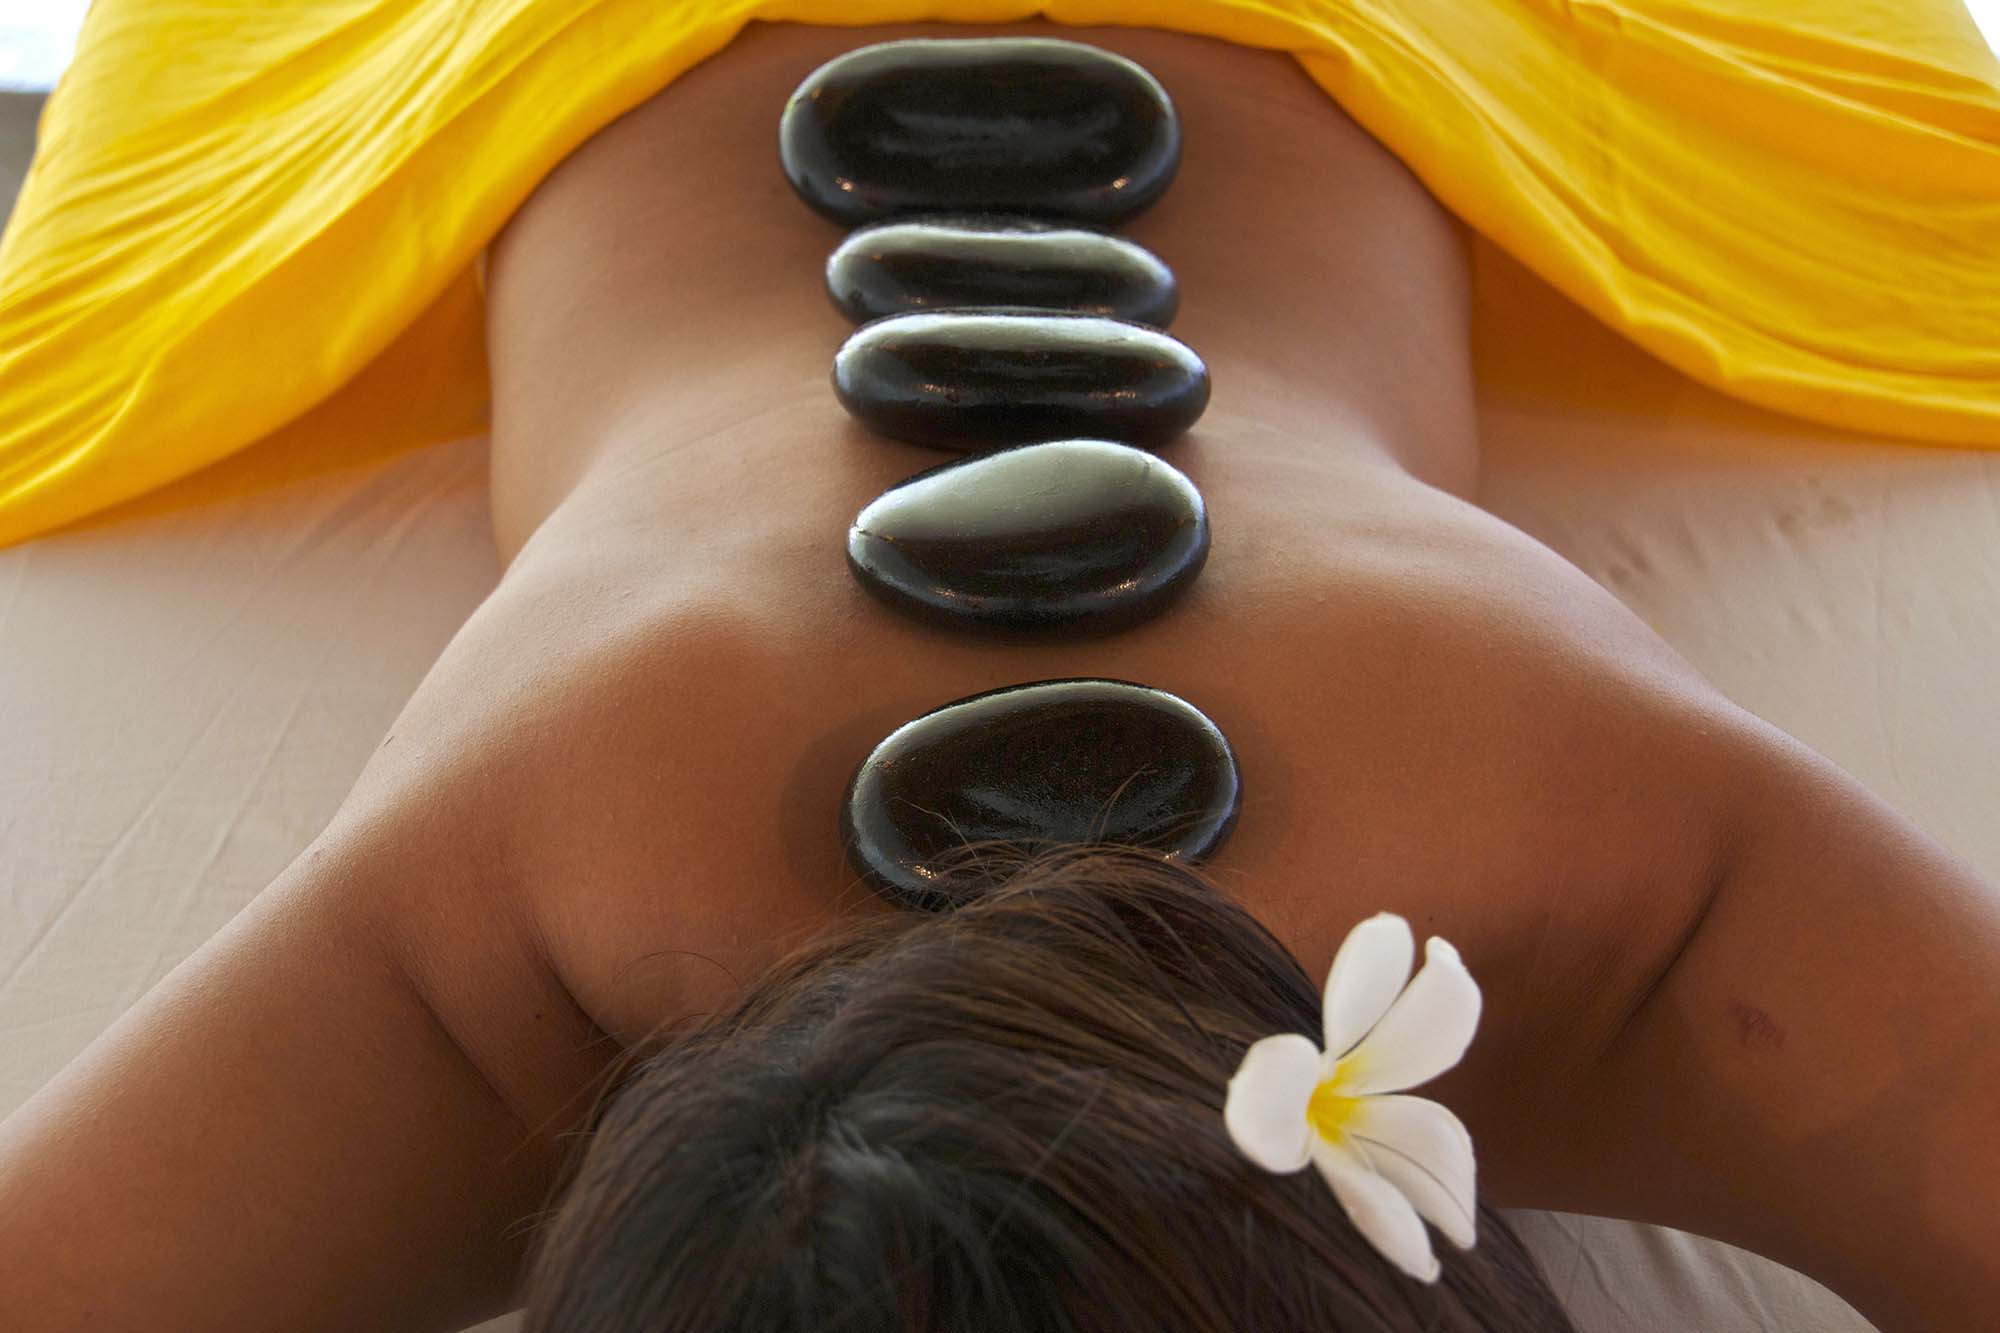 Hot smooth basalt stones placed on the spine on a woman during a hot stone massage